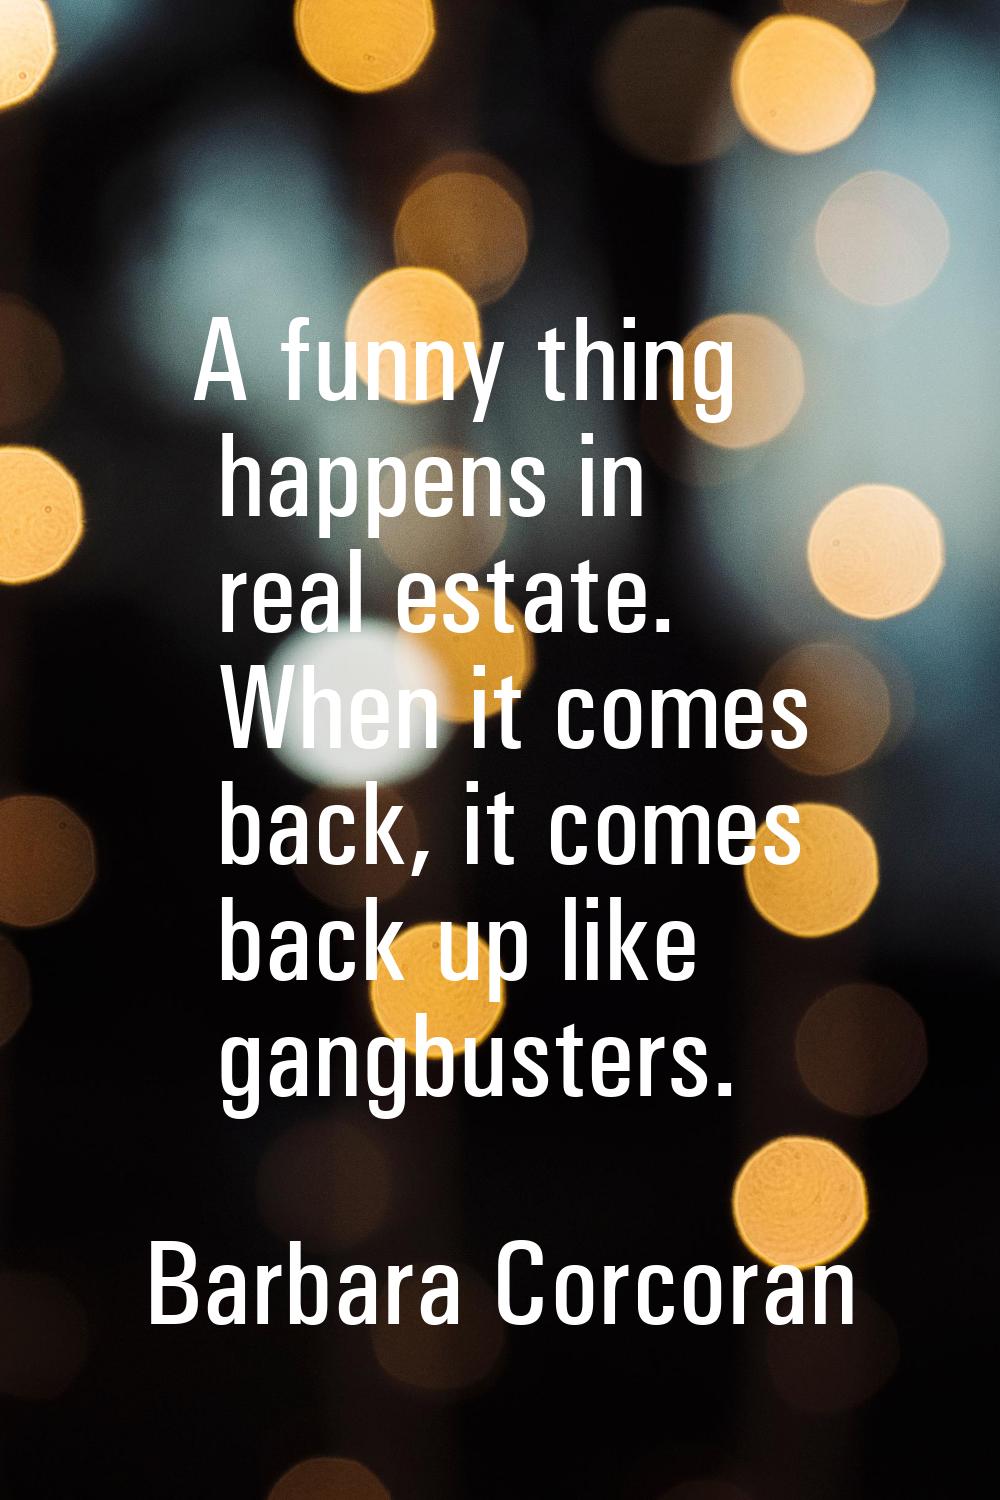 A funny thing happens in real estate. When it comes back, it comes back up like gangbusters.